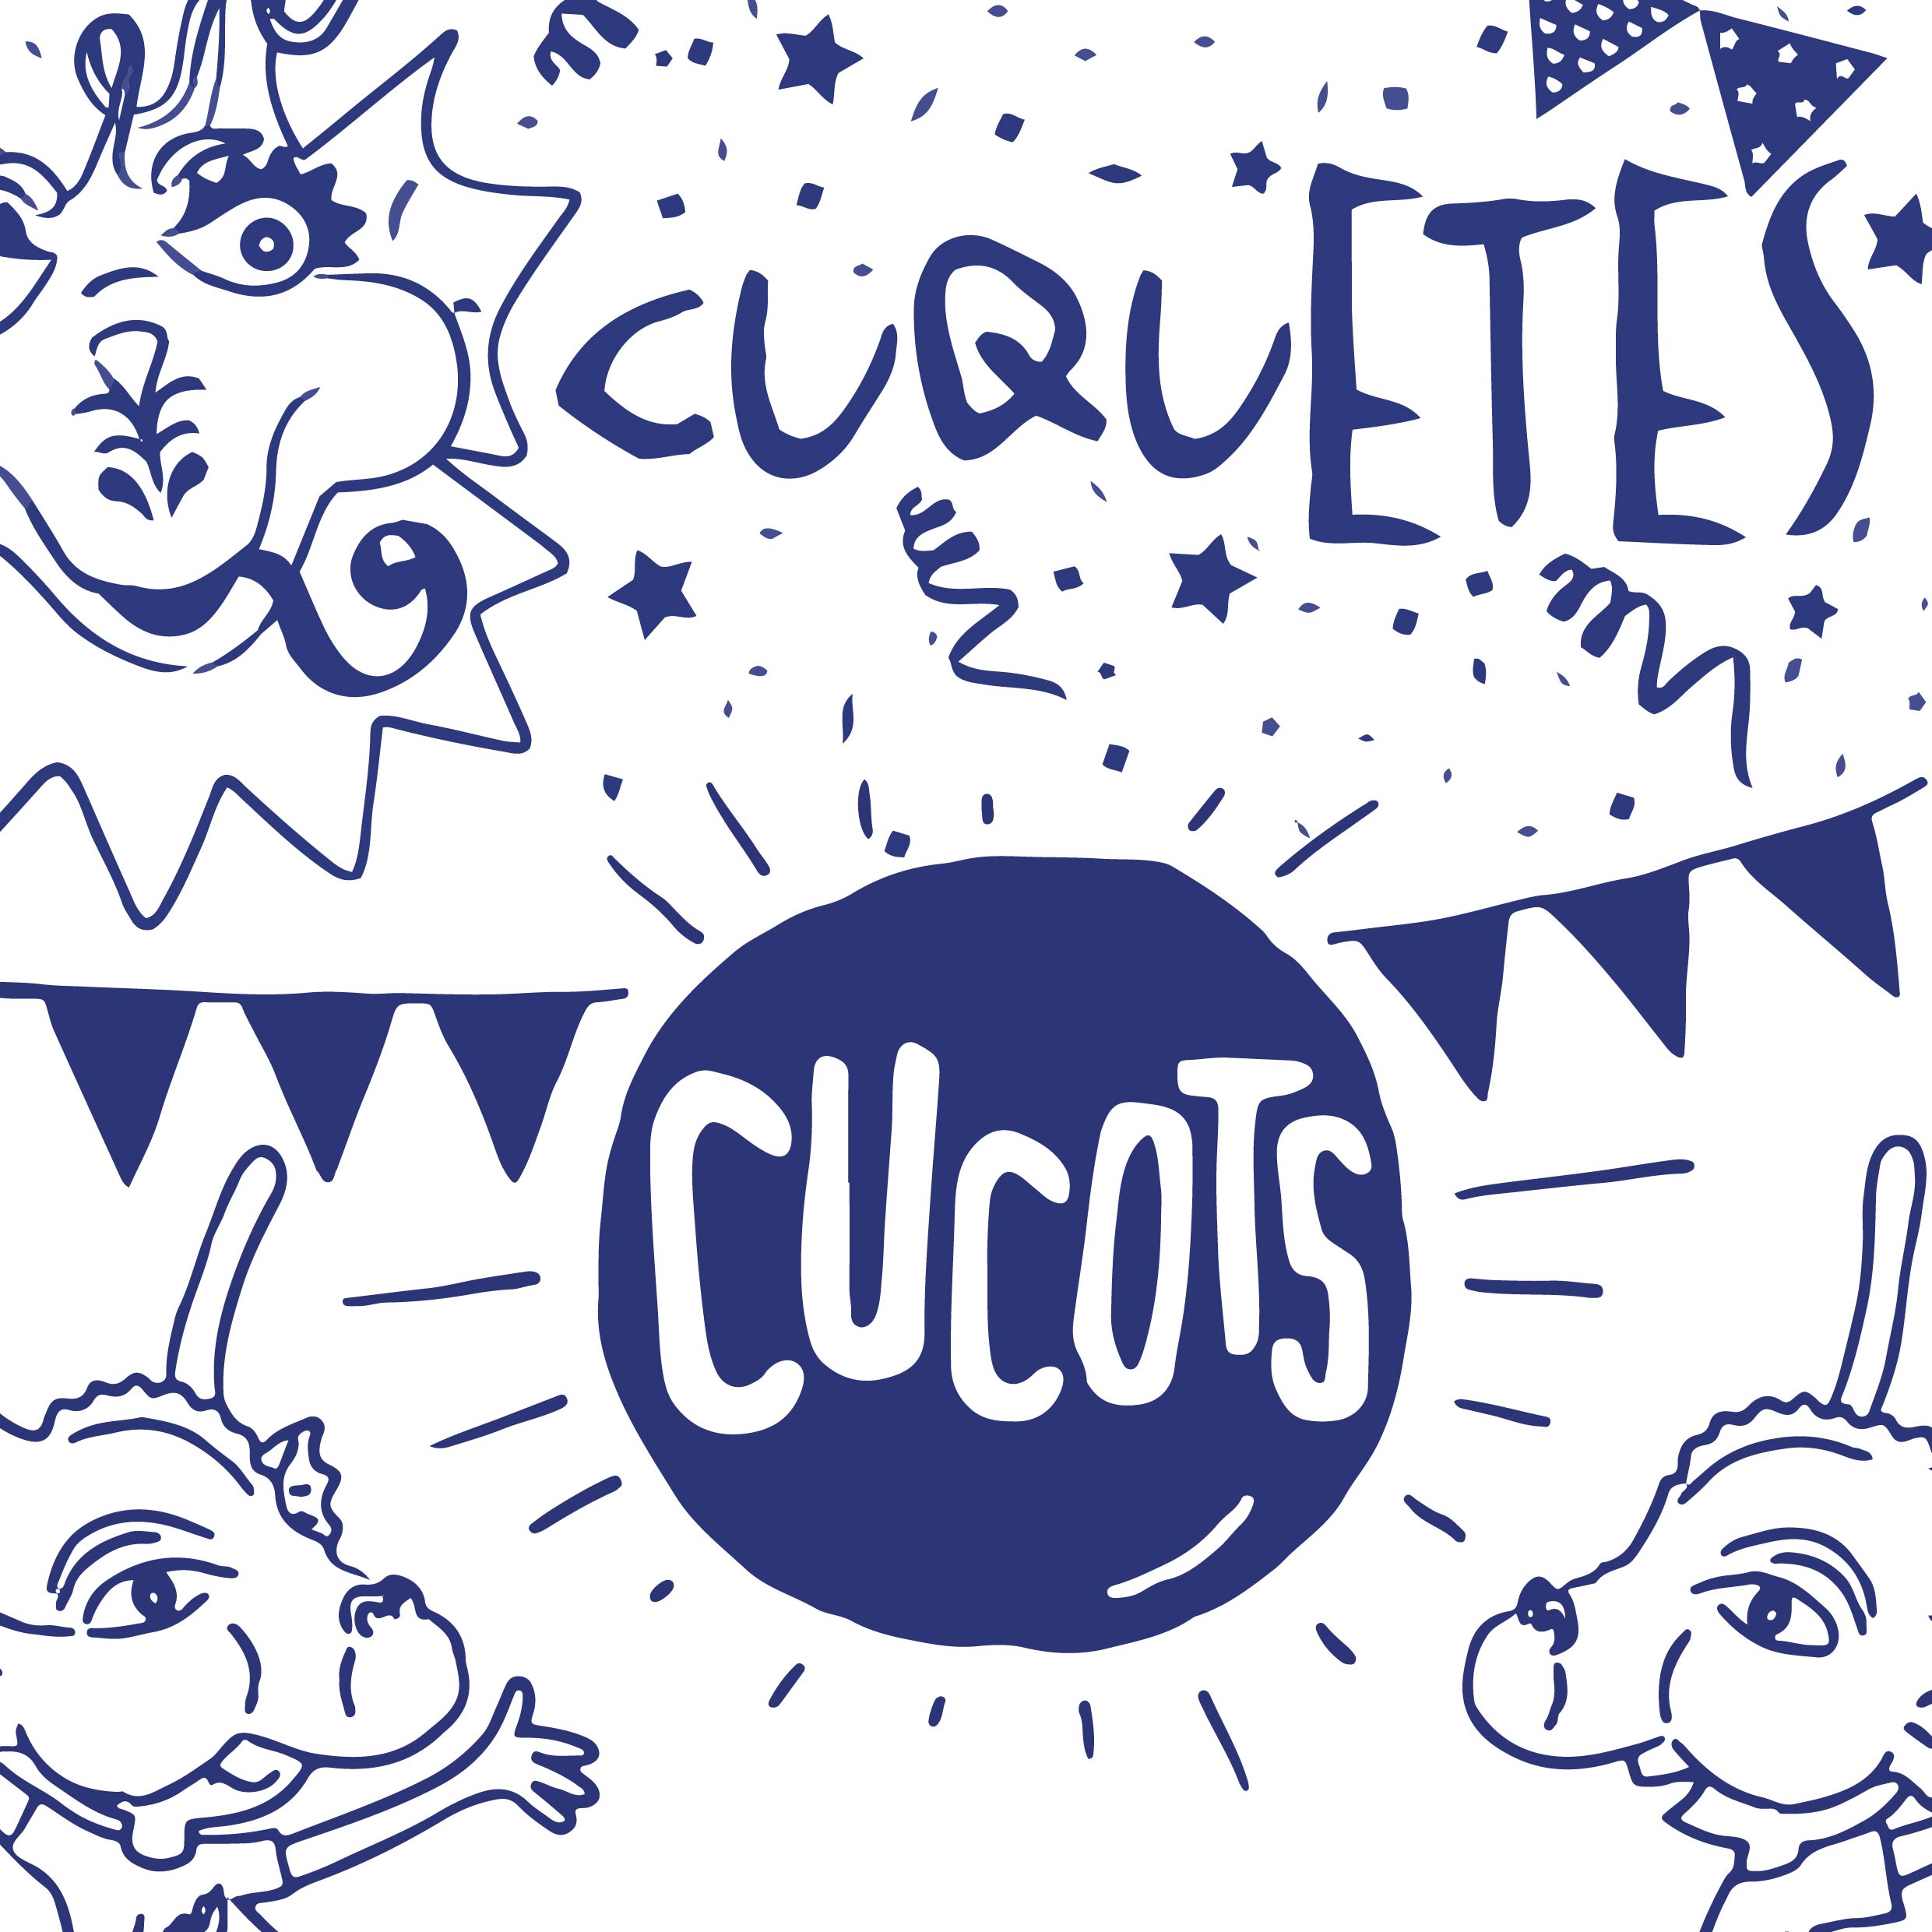 You are currently viewing Cuquetes i Cucots